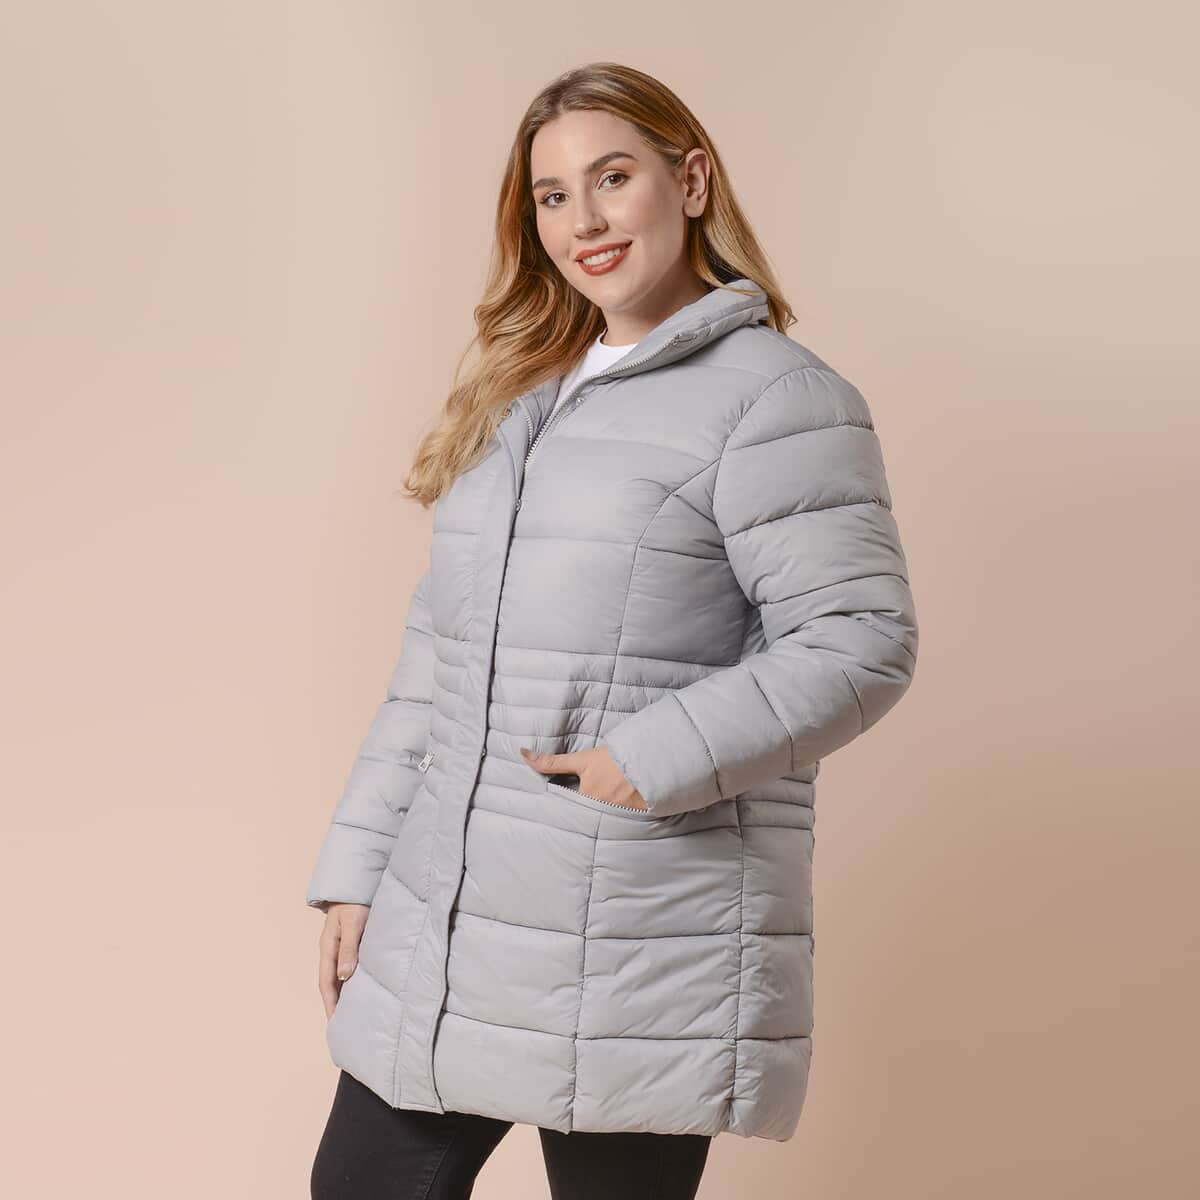 Passage Light Grey Long Sleeve Women Coat with 2 Zipper Pocket (M, Shell: 100% Nylon and Lining: 100% Polyester) image number 2